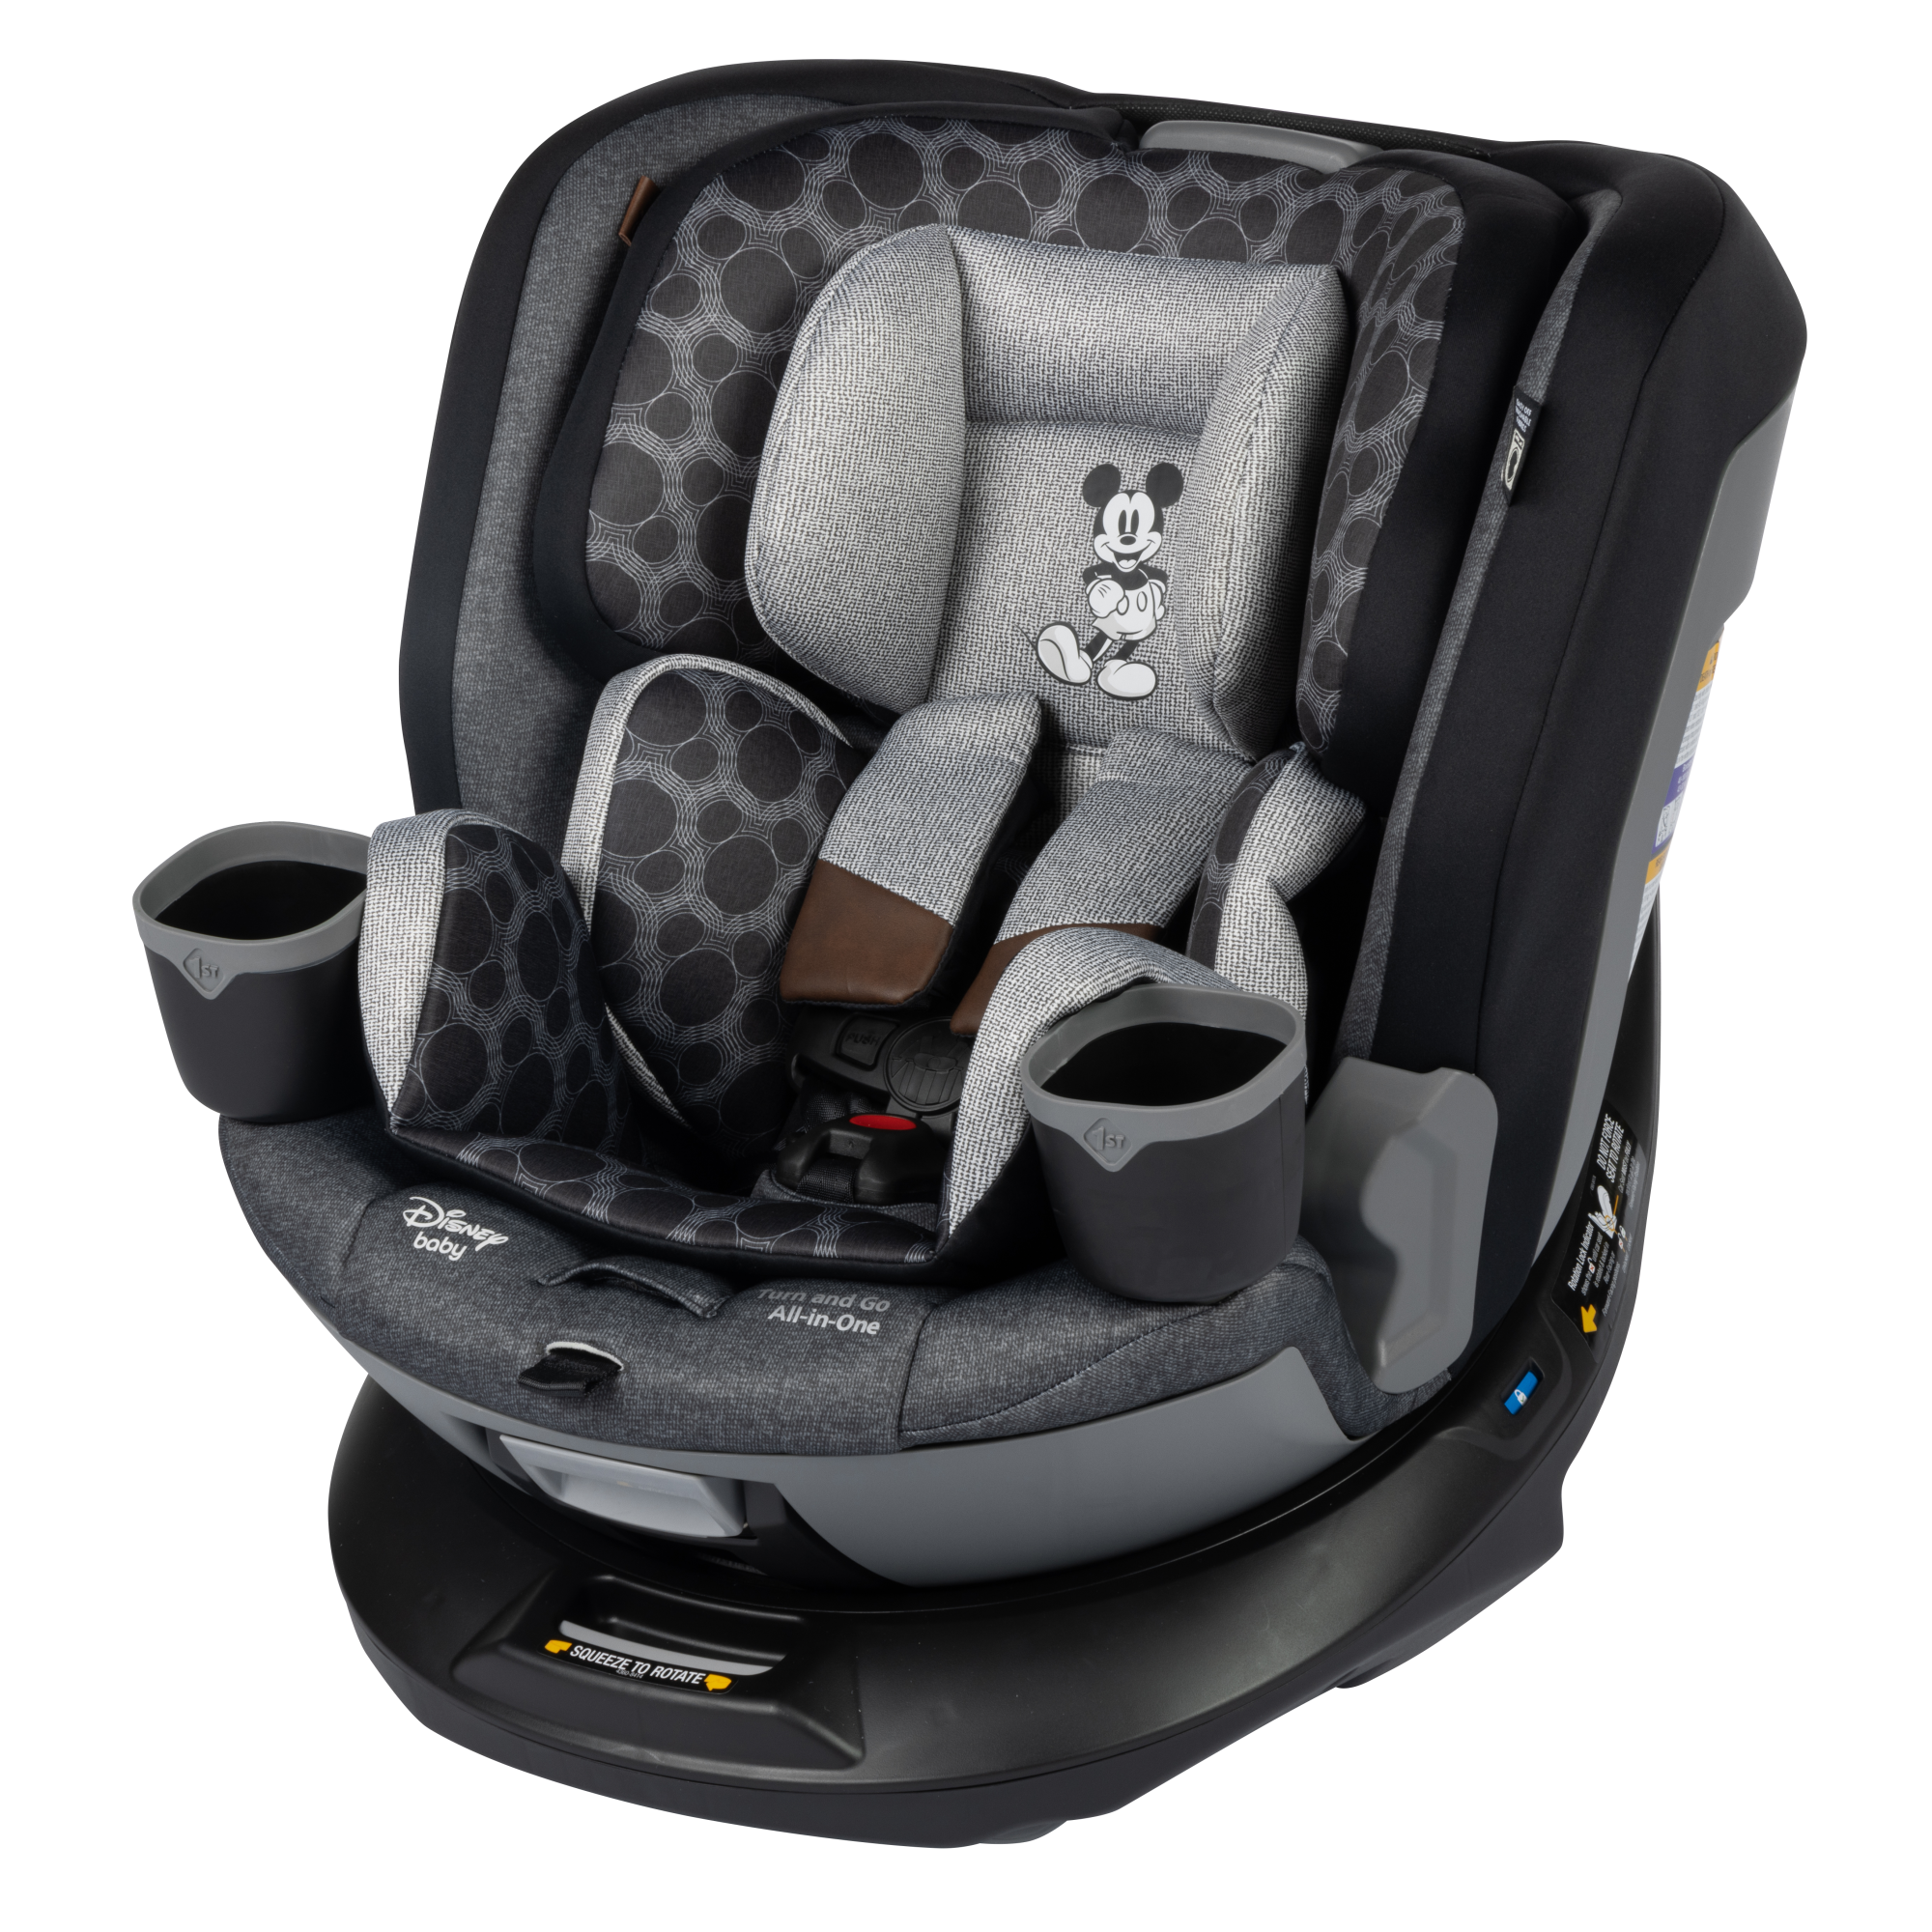 Disney Baby Turn and Go 360 Rotating All-in-One Convertible Car Seat - 45 degree angle view of left side